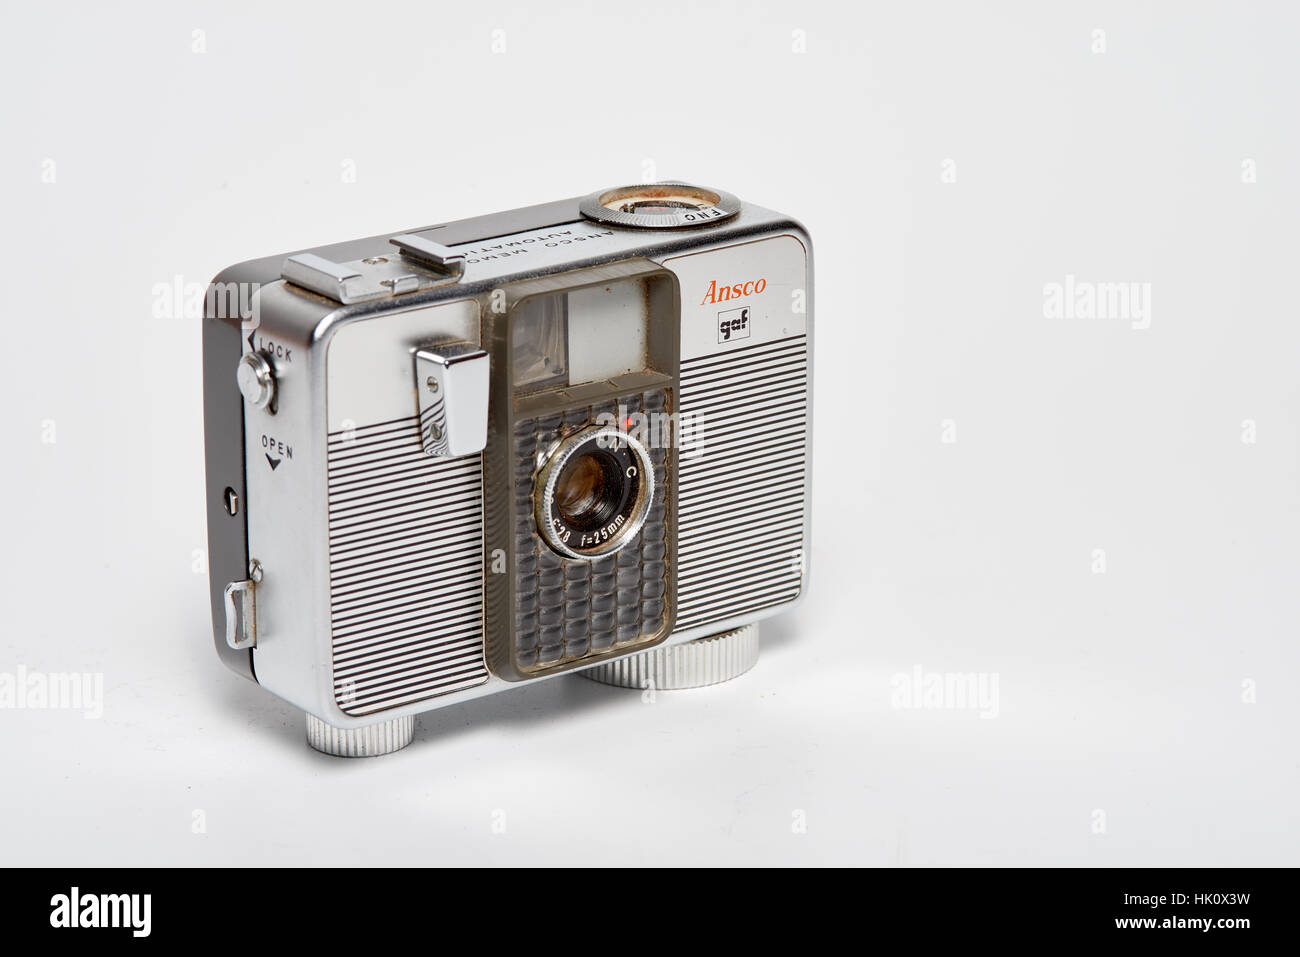 The Ansco Memo II Automatic is a 35mm half-frame camera introduced in 1967 by Ansco. The Memo II Automatic and the Ansco Memo Automatic from 1963 are  Stock Photo